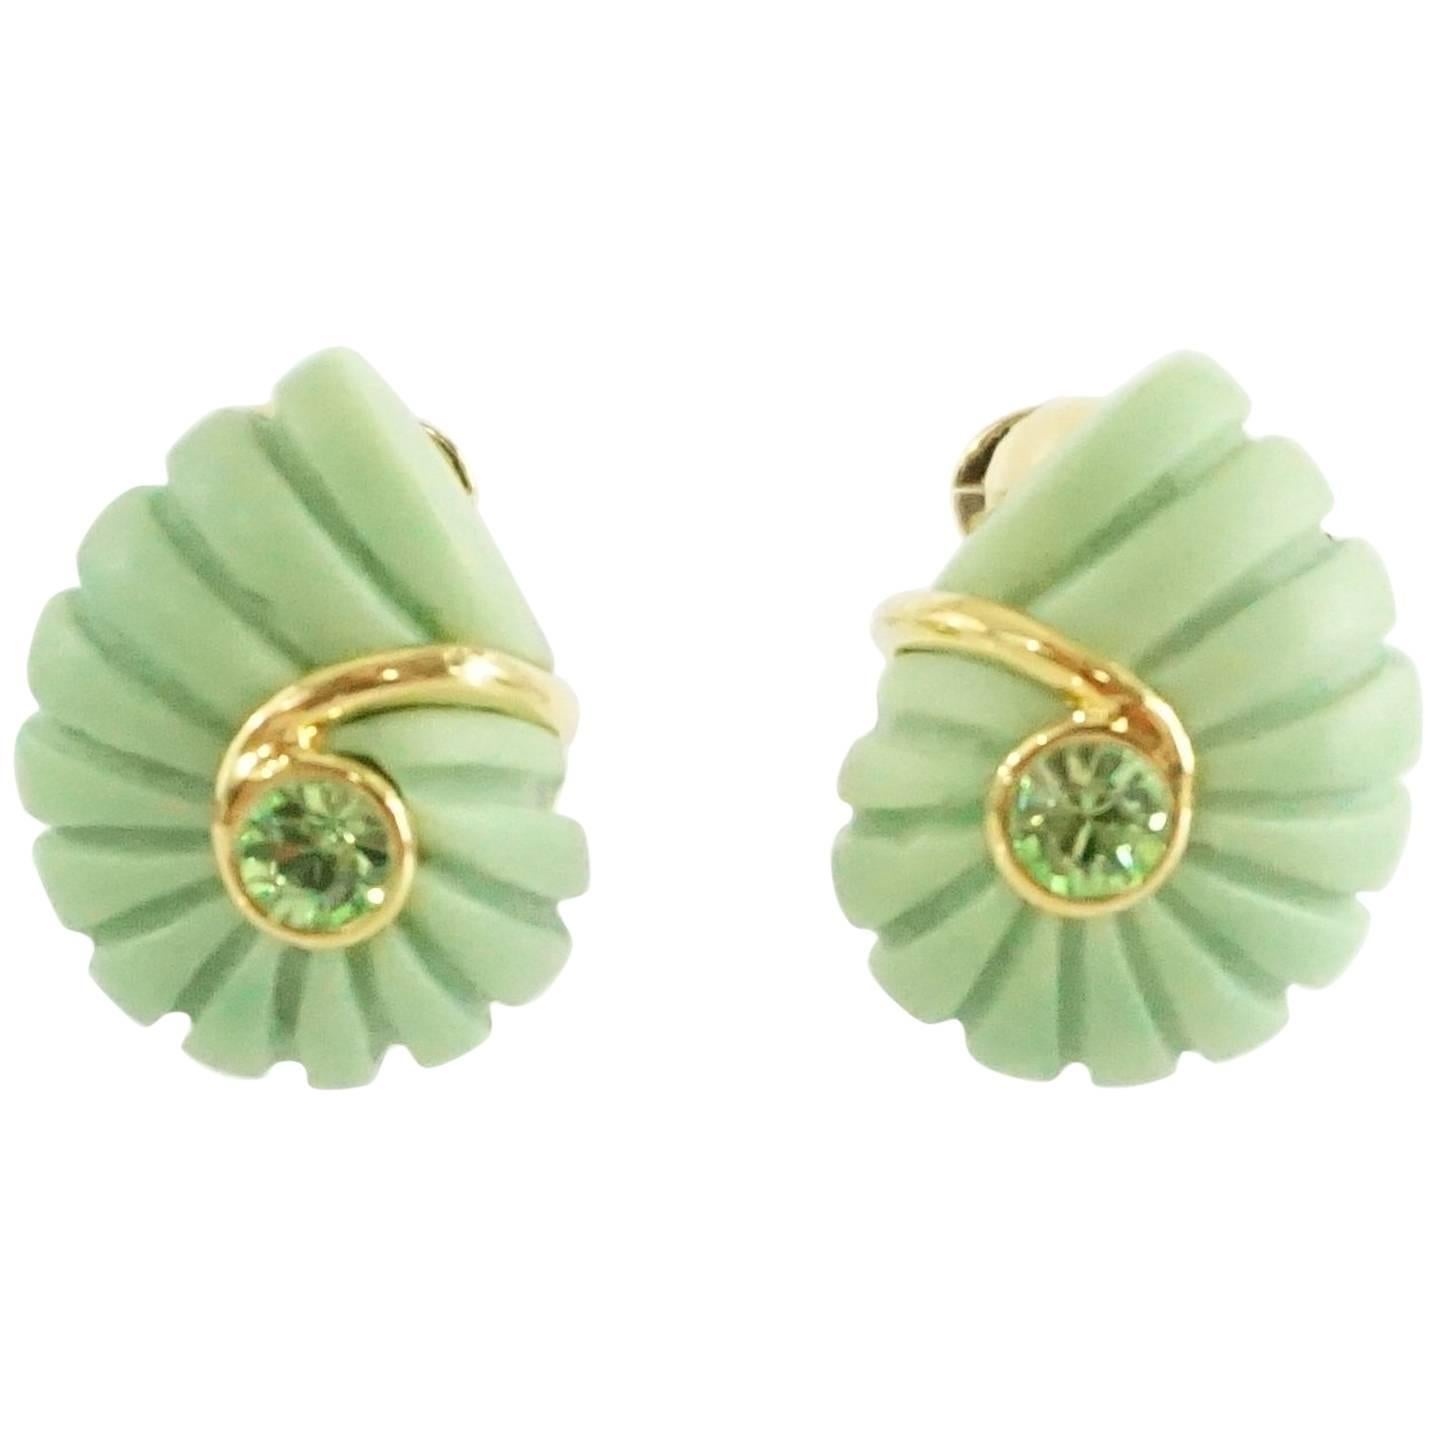 Replica Green Spiral with Green Rhinestone and Gold Detailing Clip Earrings